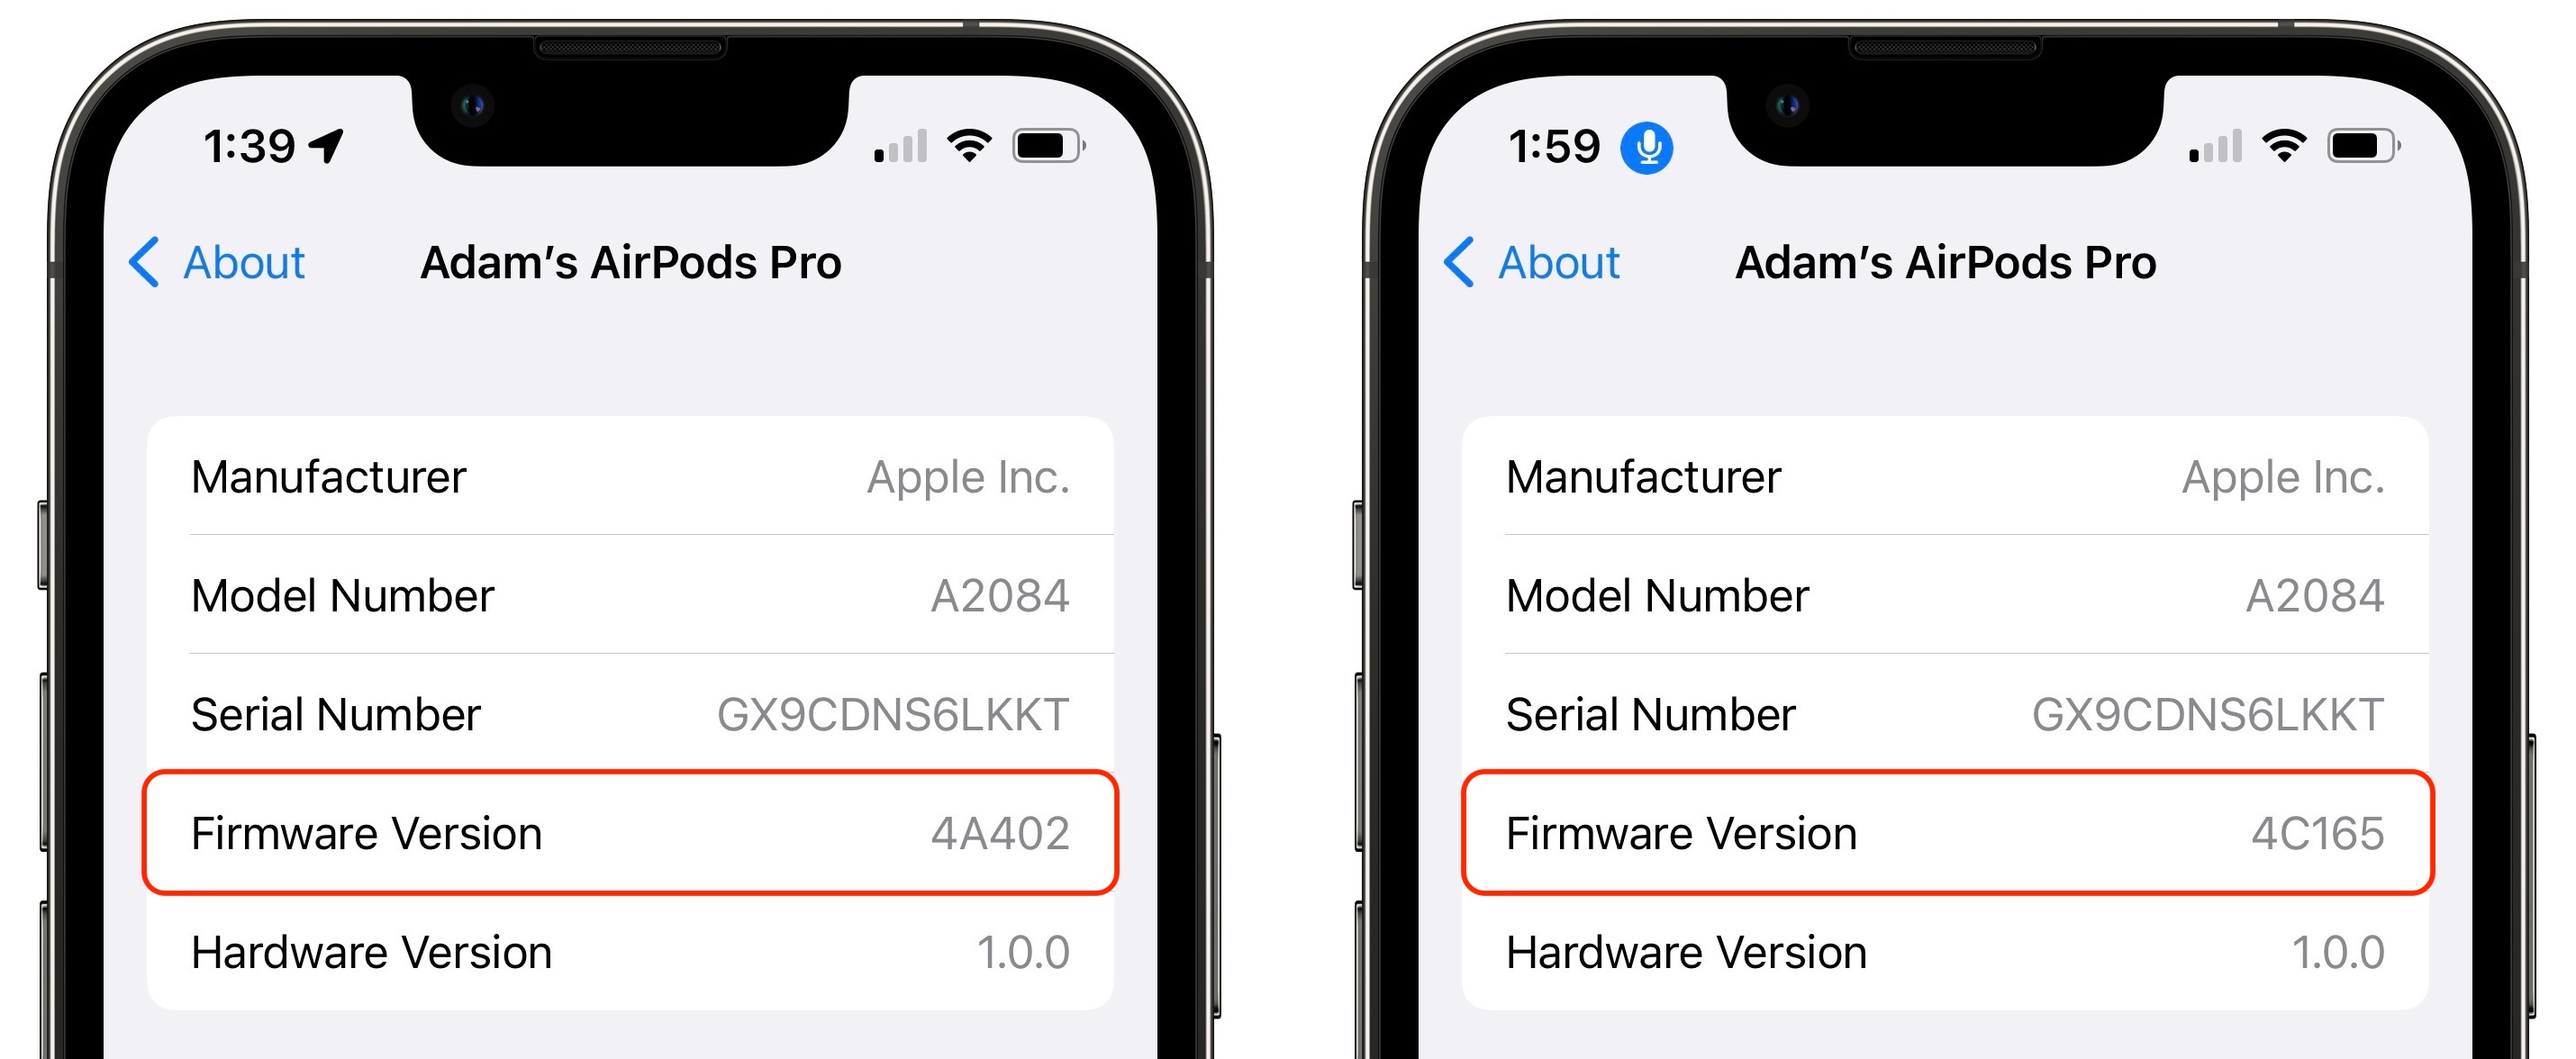 hit Have a picnic engine Apple Updates AirPods Firmware to 4C165 - TidBITS